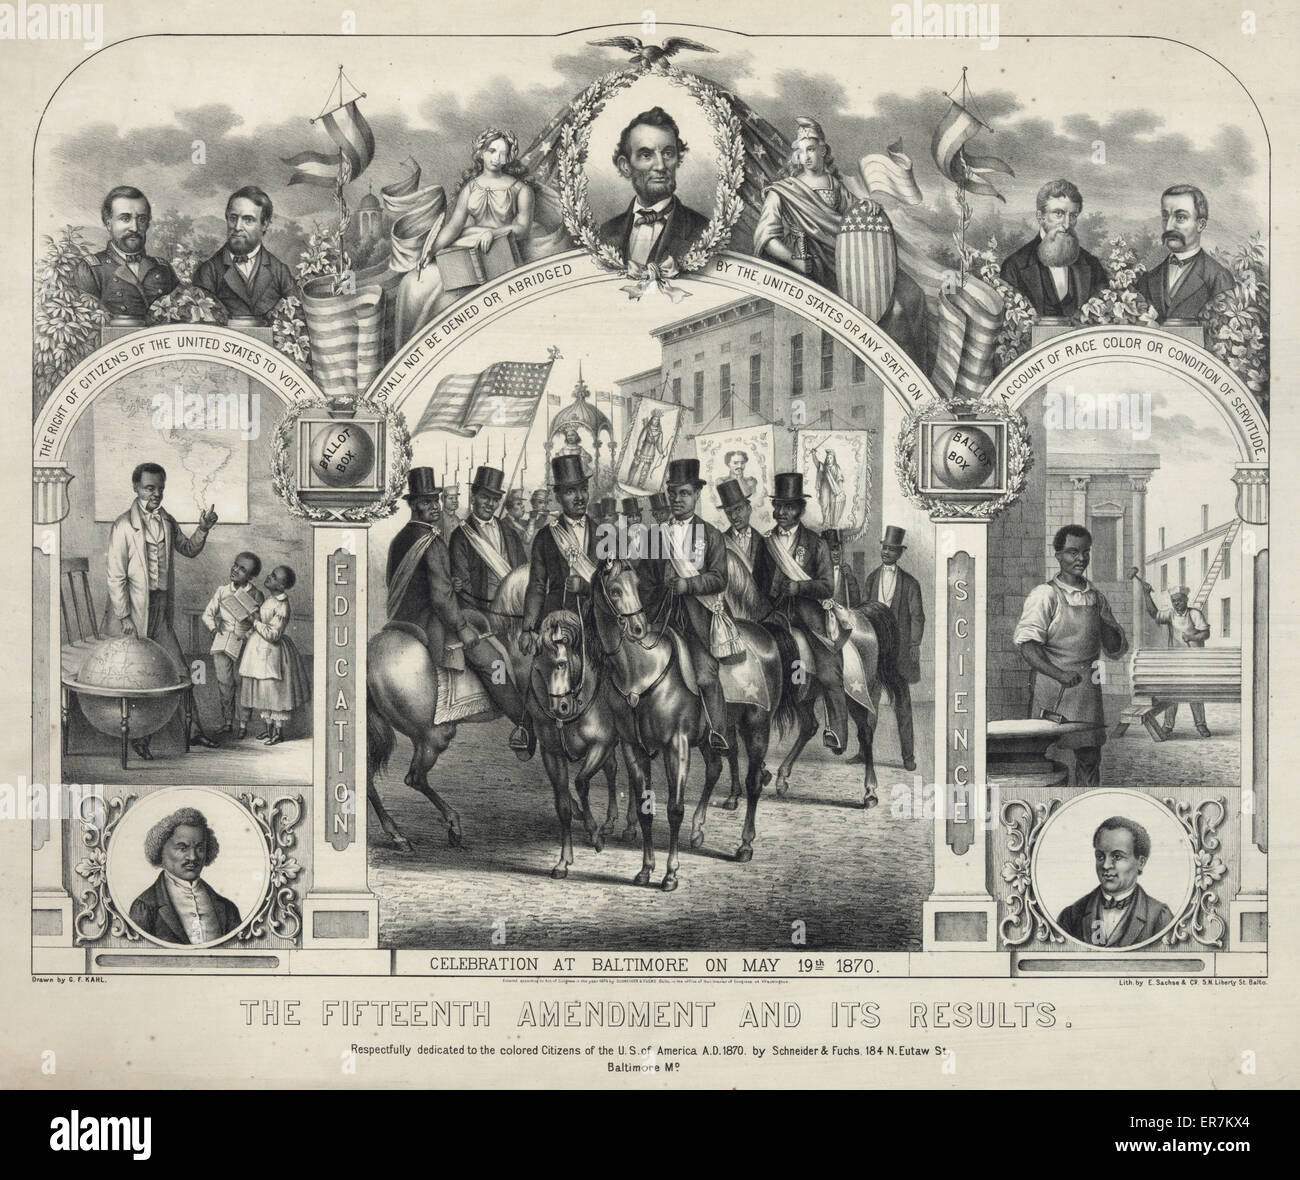 The Fifteenth Amendment and its results. Another of several large prints commemorating the celebration in Baltimore of the enactment of the Fifteenth Amendment. (See also nos. 1870-2 and 1870-3.) A group of black men, on horseback and wearing top hats, sa Stock Photo